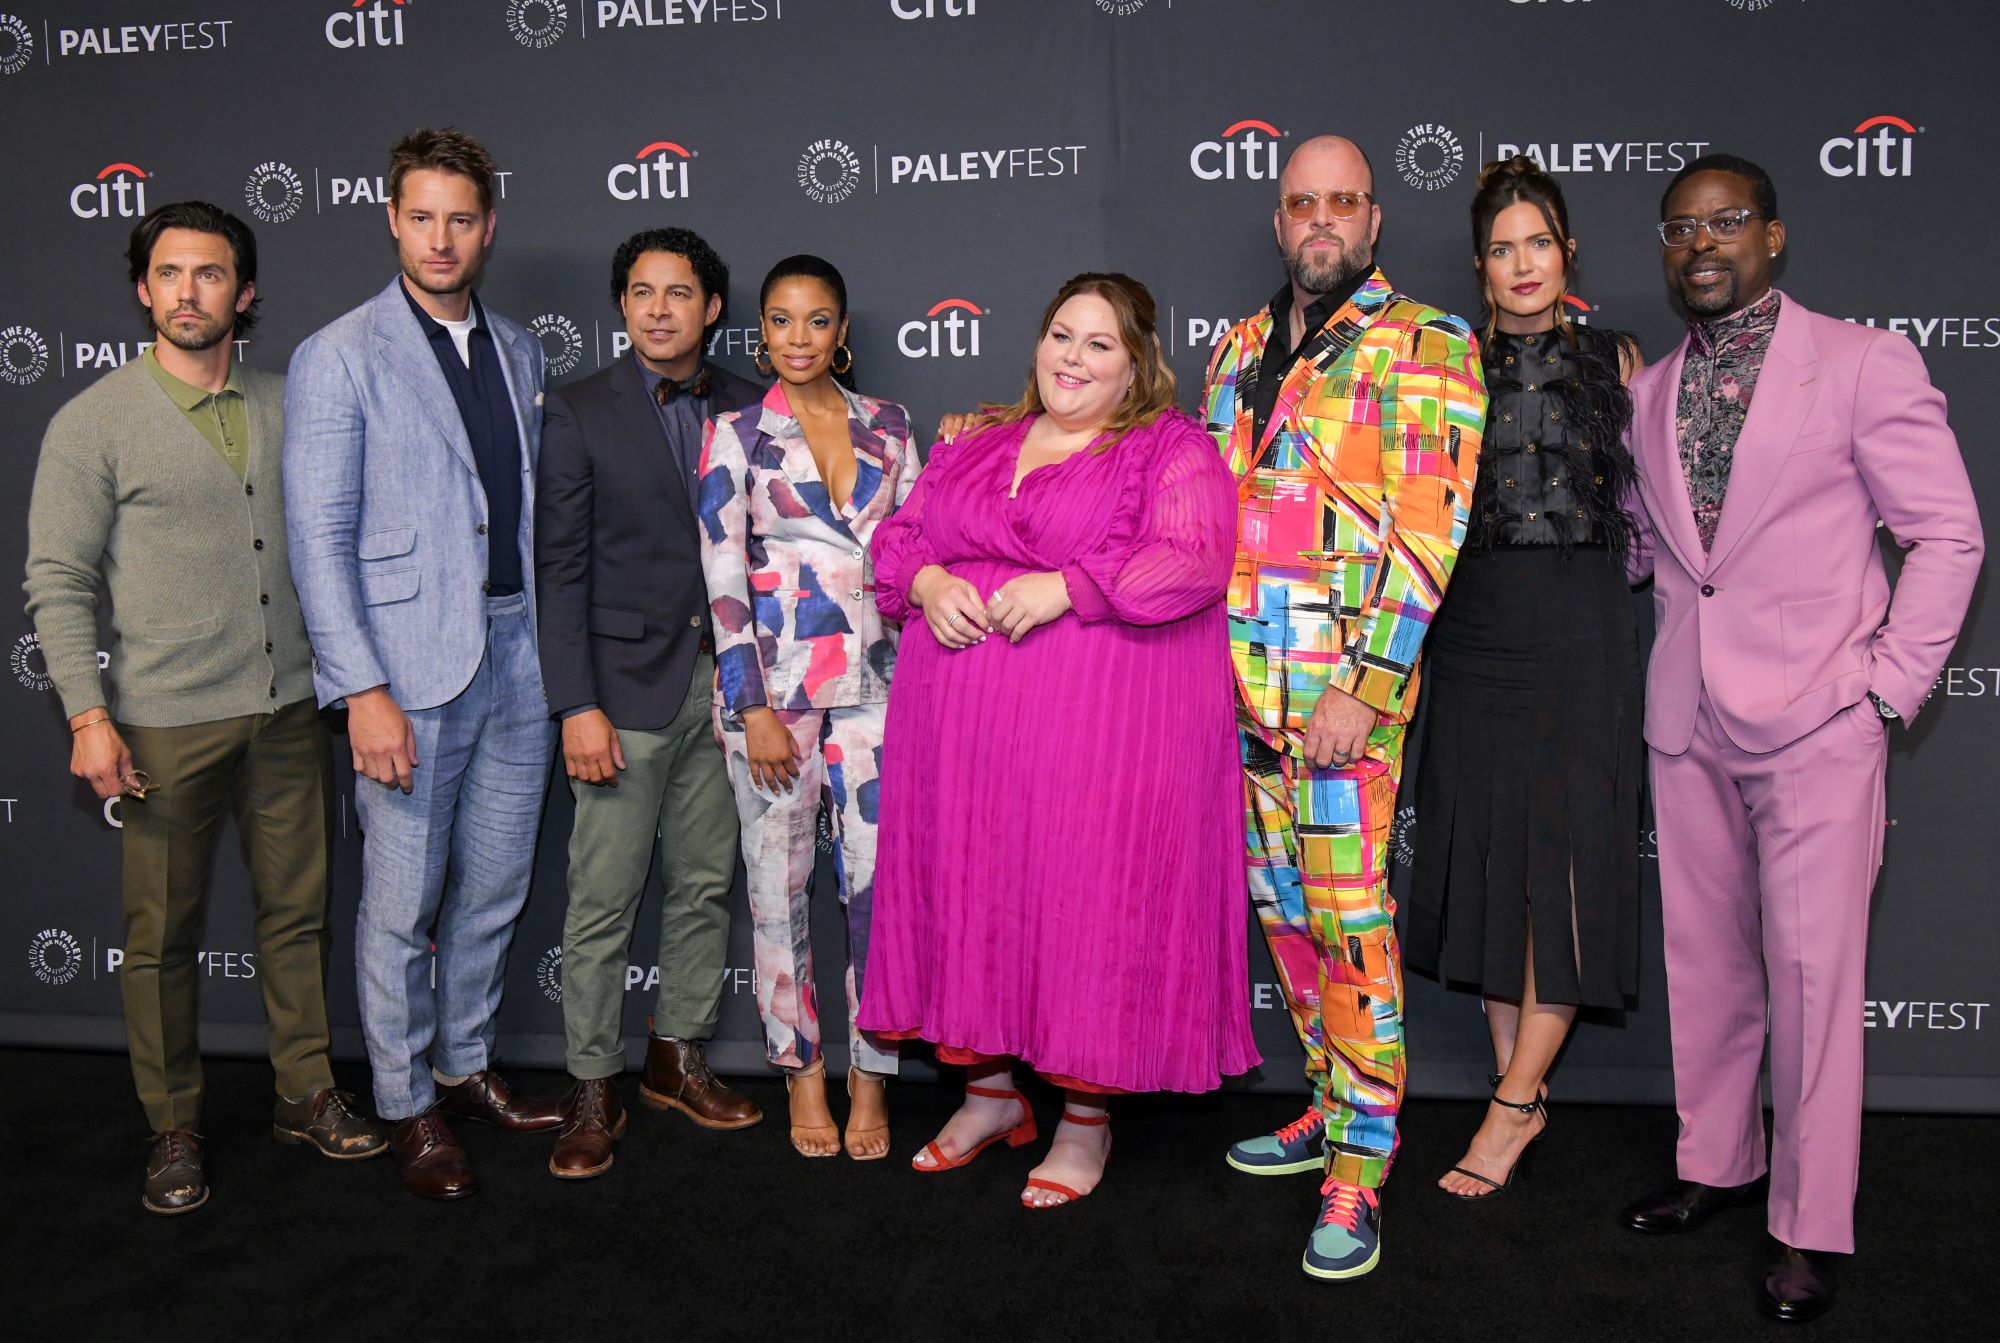 The 'This Is Us' cast, including Milo Ventimiglia, Justin Hartley, Jon Huertas, Susan Kelechi Watson, Chrissy Metz, Chris Sullivan, Mandy Moore, and Sterling K. Brown, pose for picture together on the red carpet.